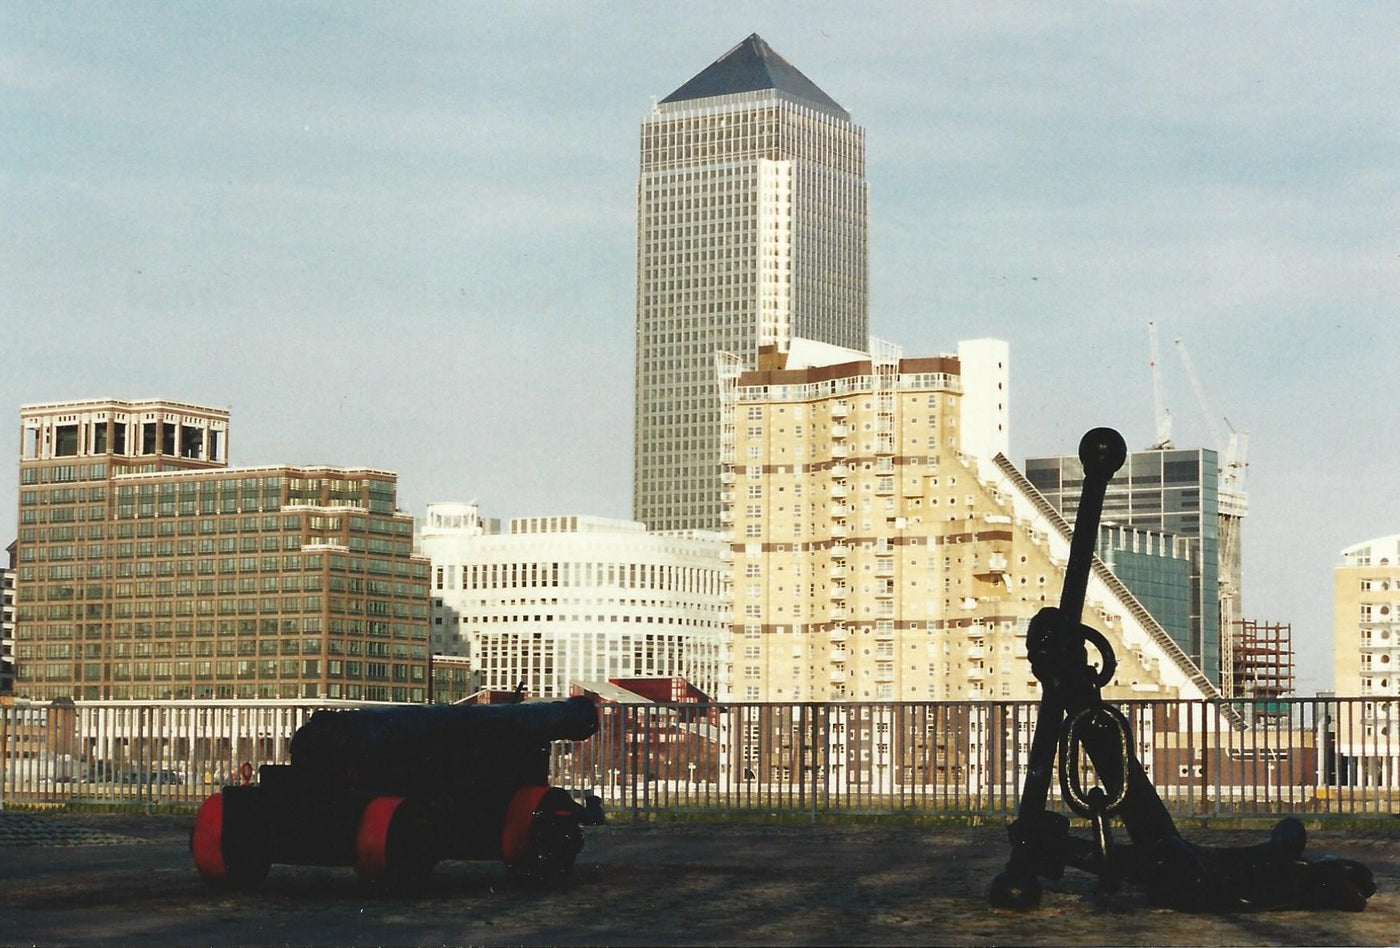 Canary Wharf and cannon photograph by Reginald Beer